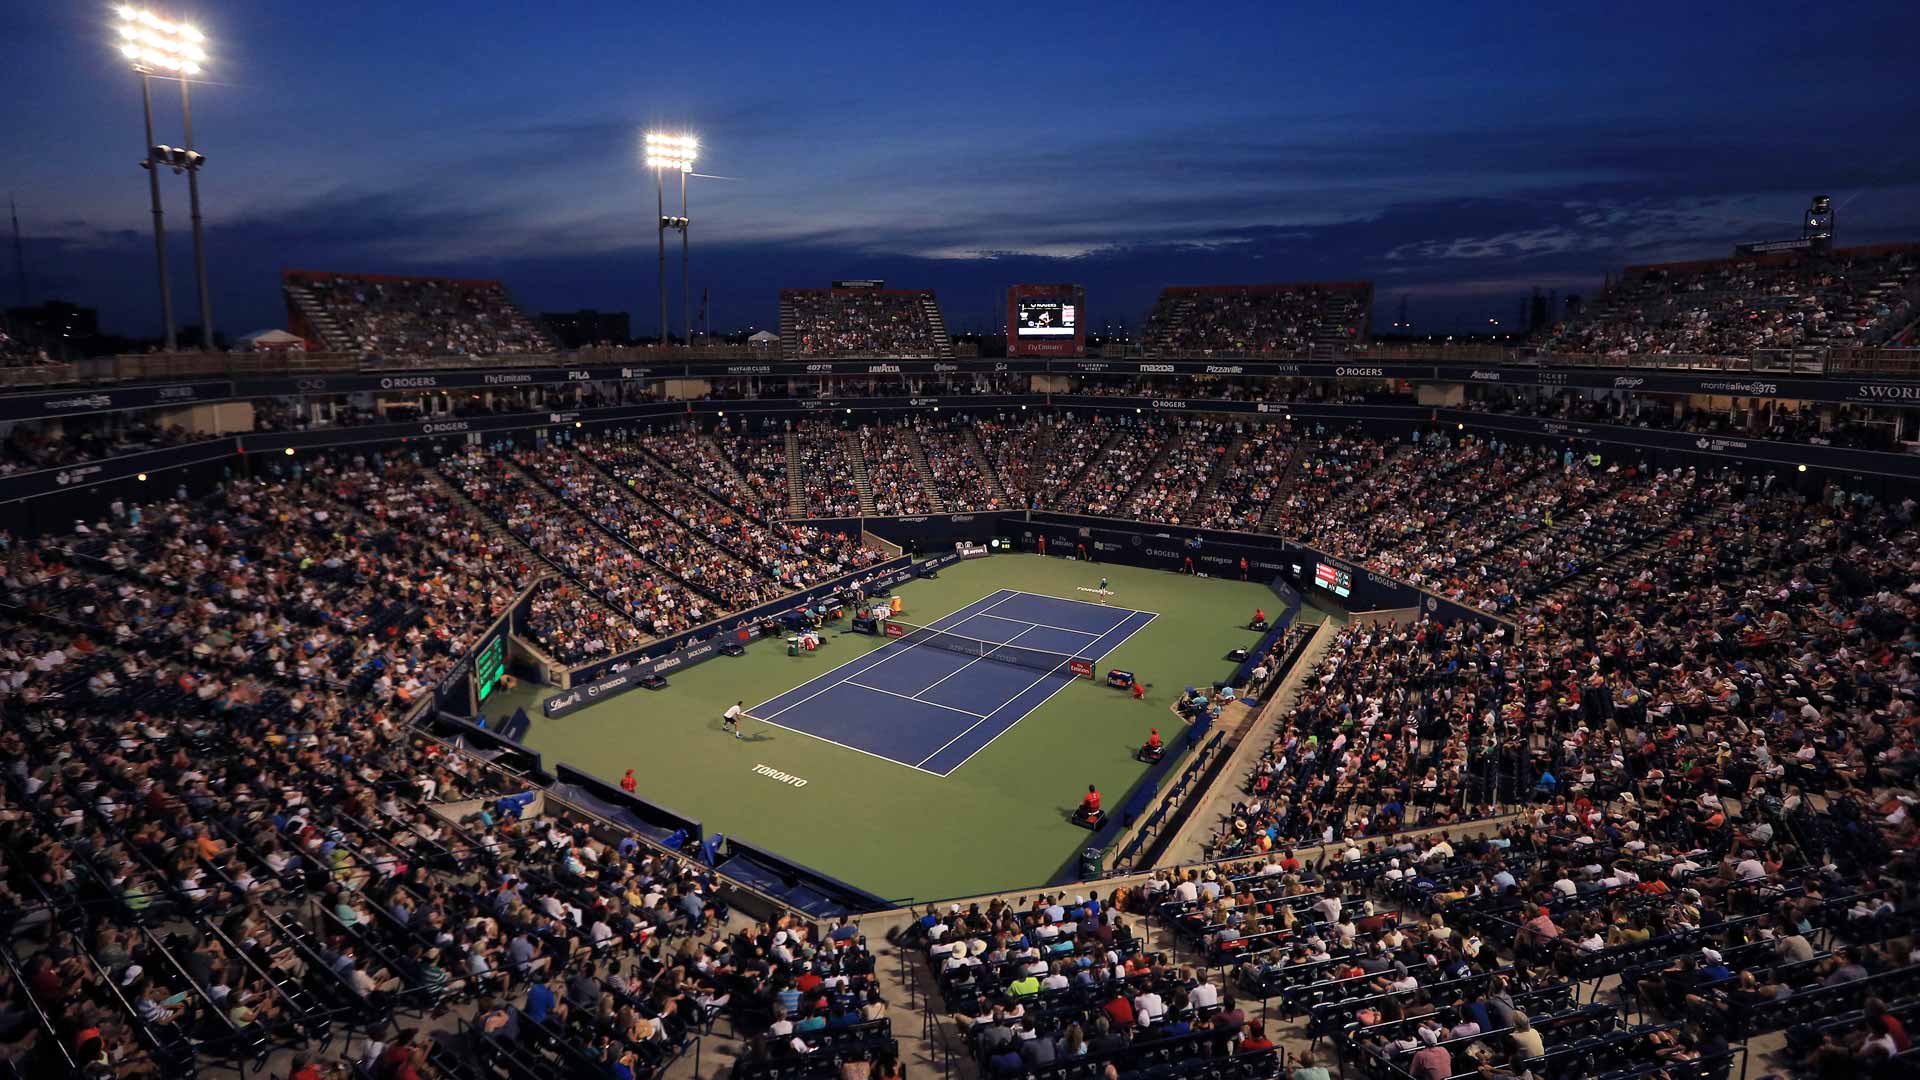 The National Bank Open Presented by Rogers runs from 7-13 August.